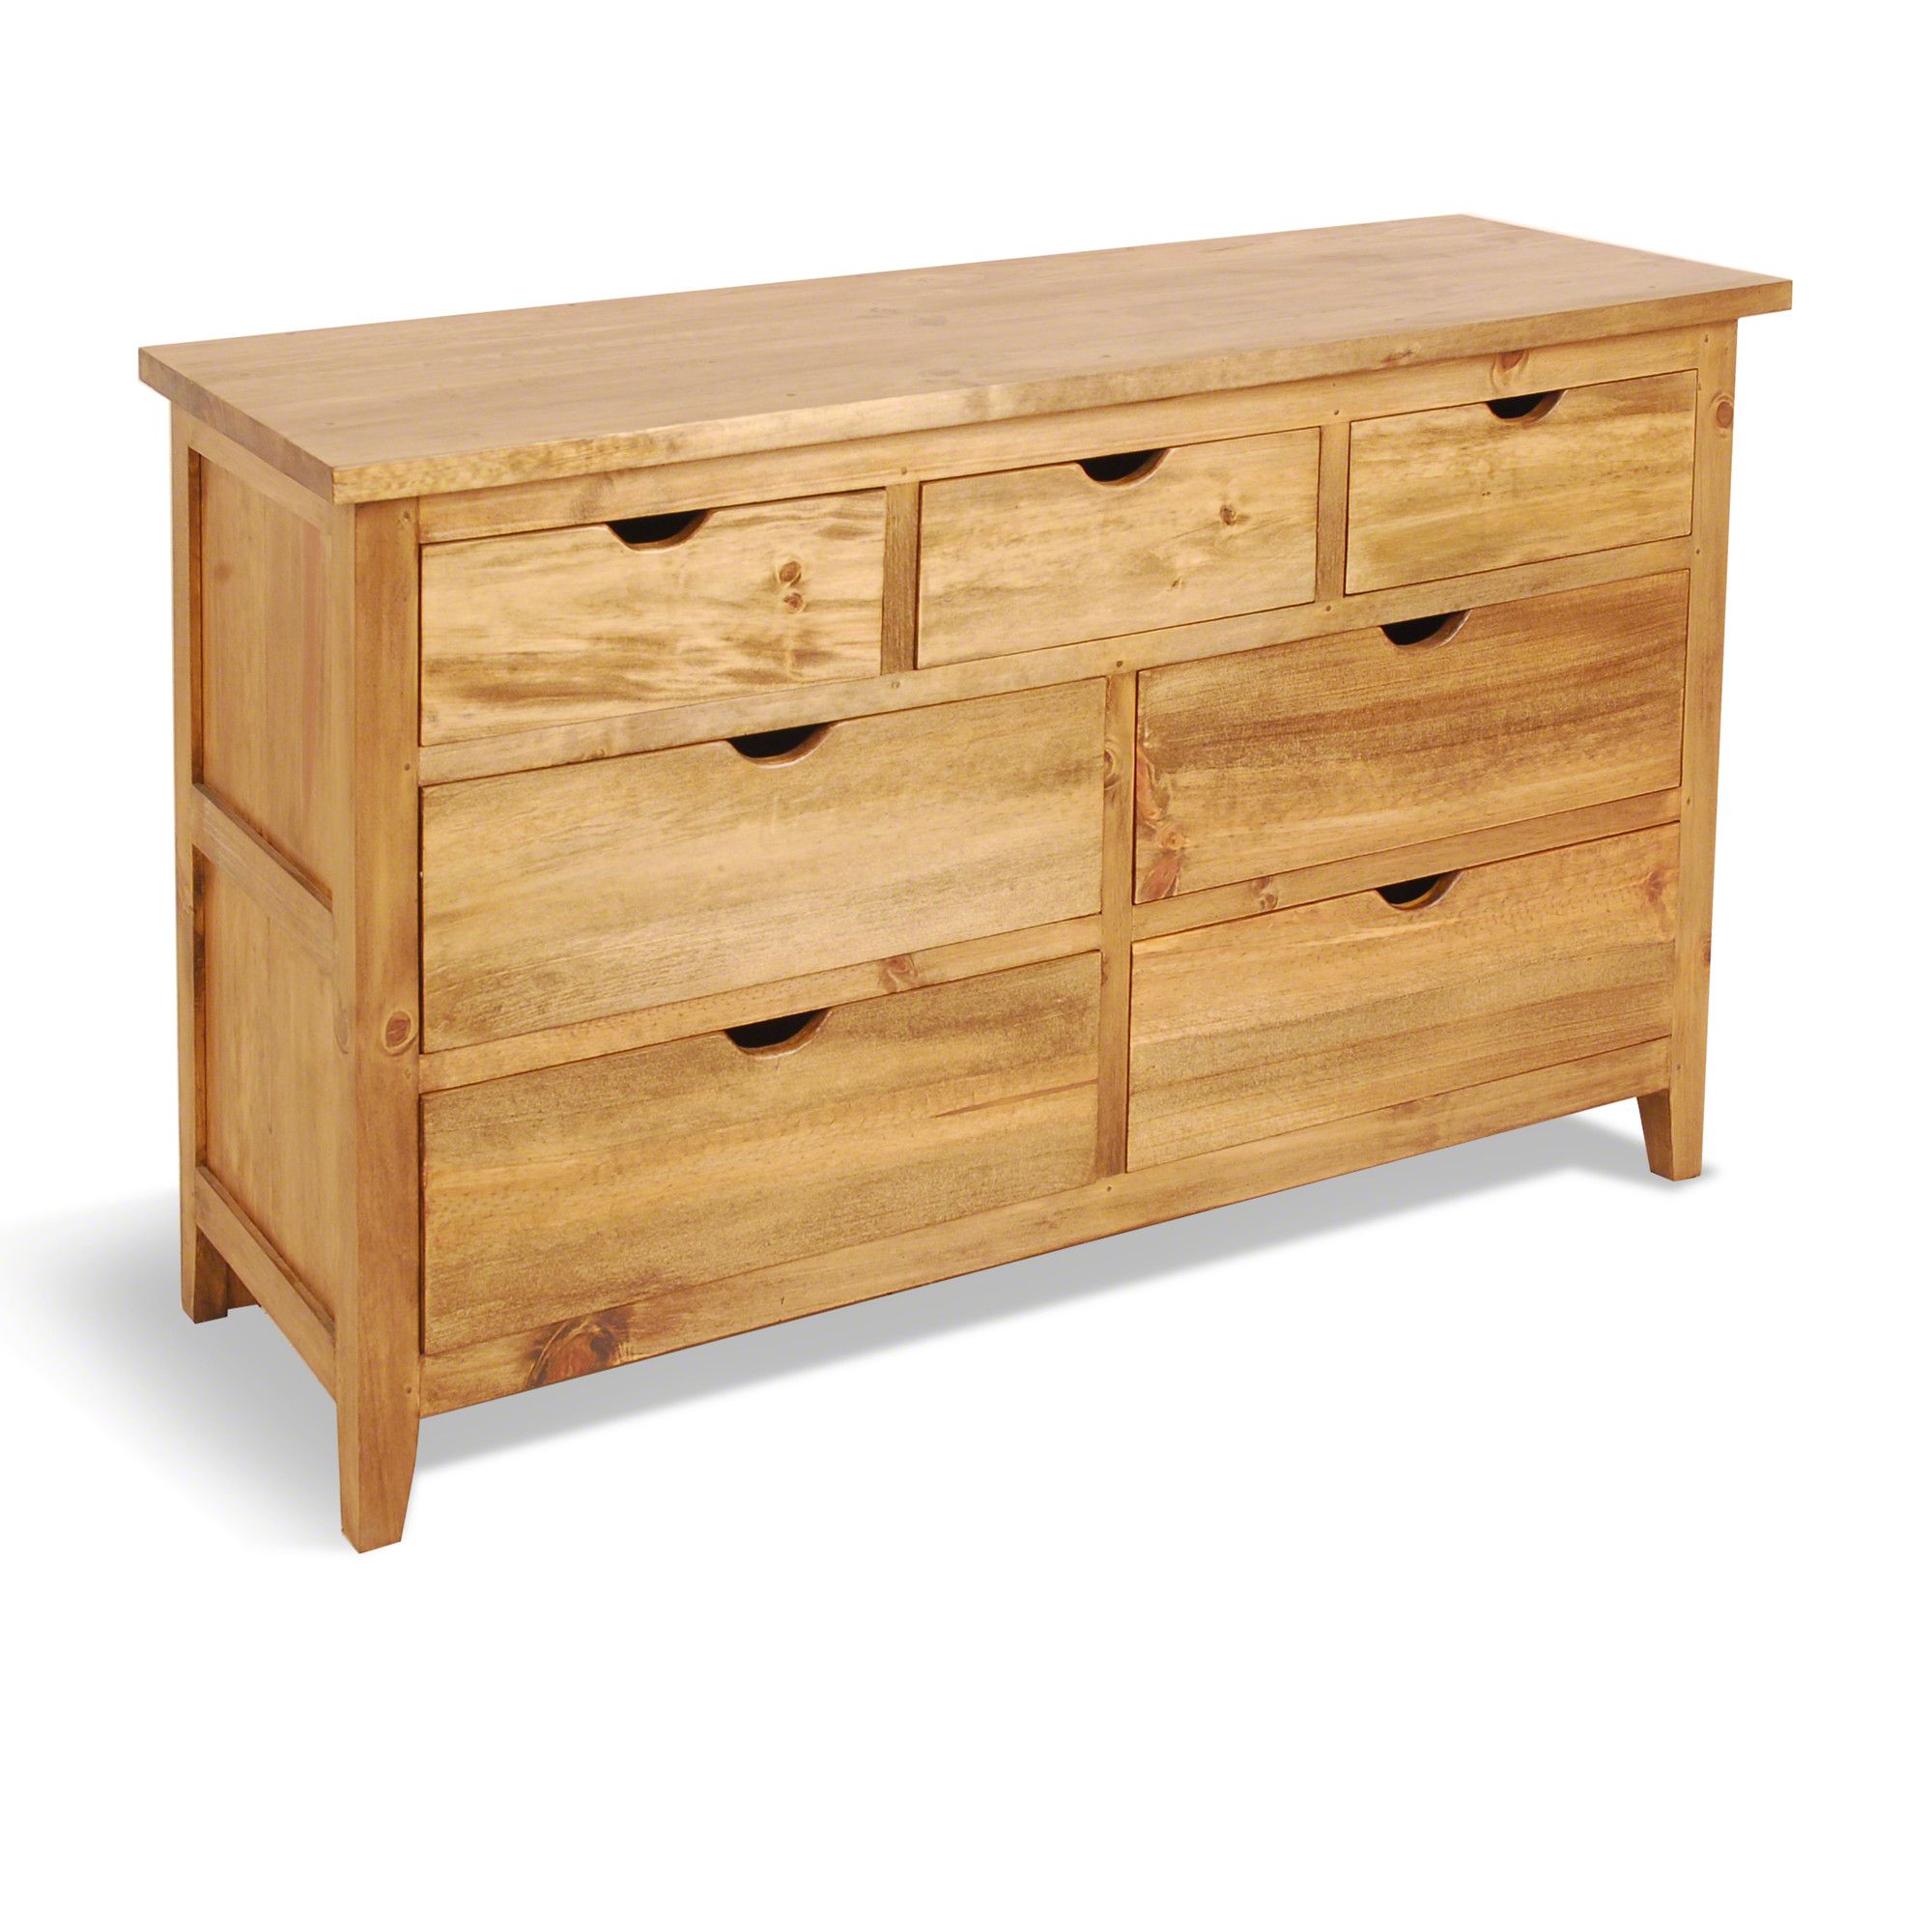 Oceans Apart Indiana Pine 7 Drawer Chest at Tesco Direct